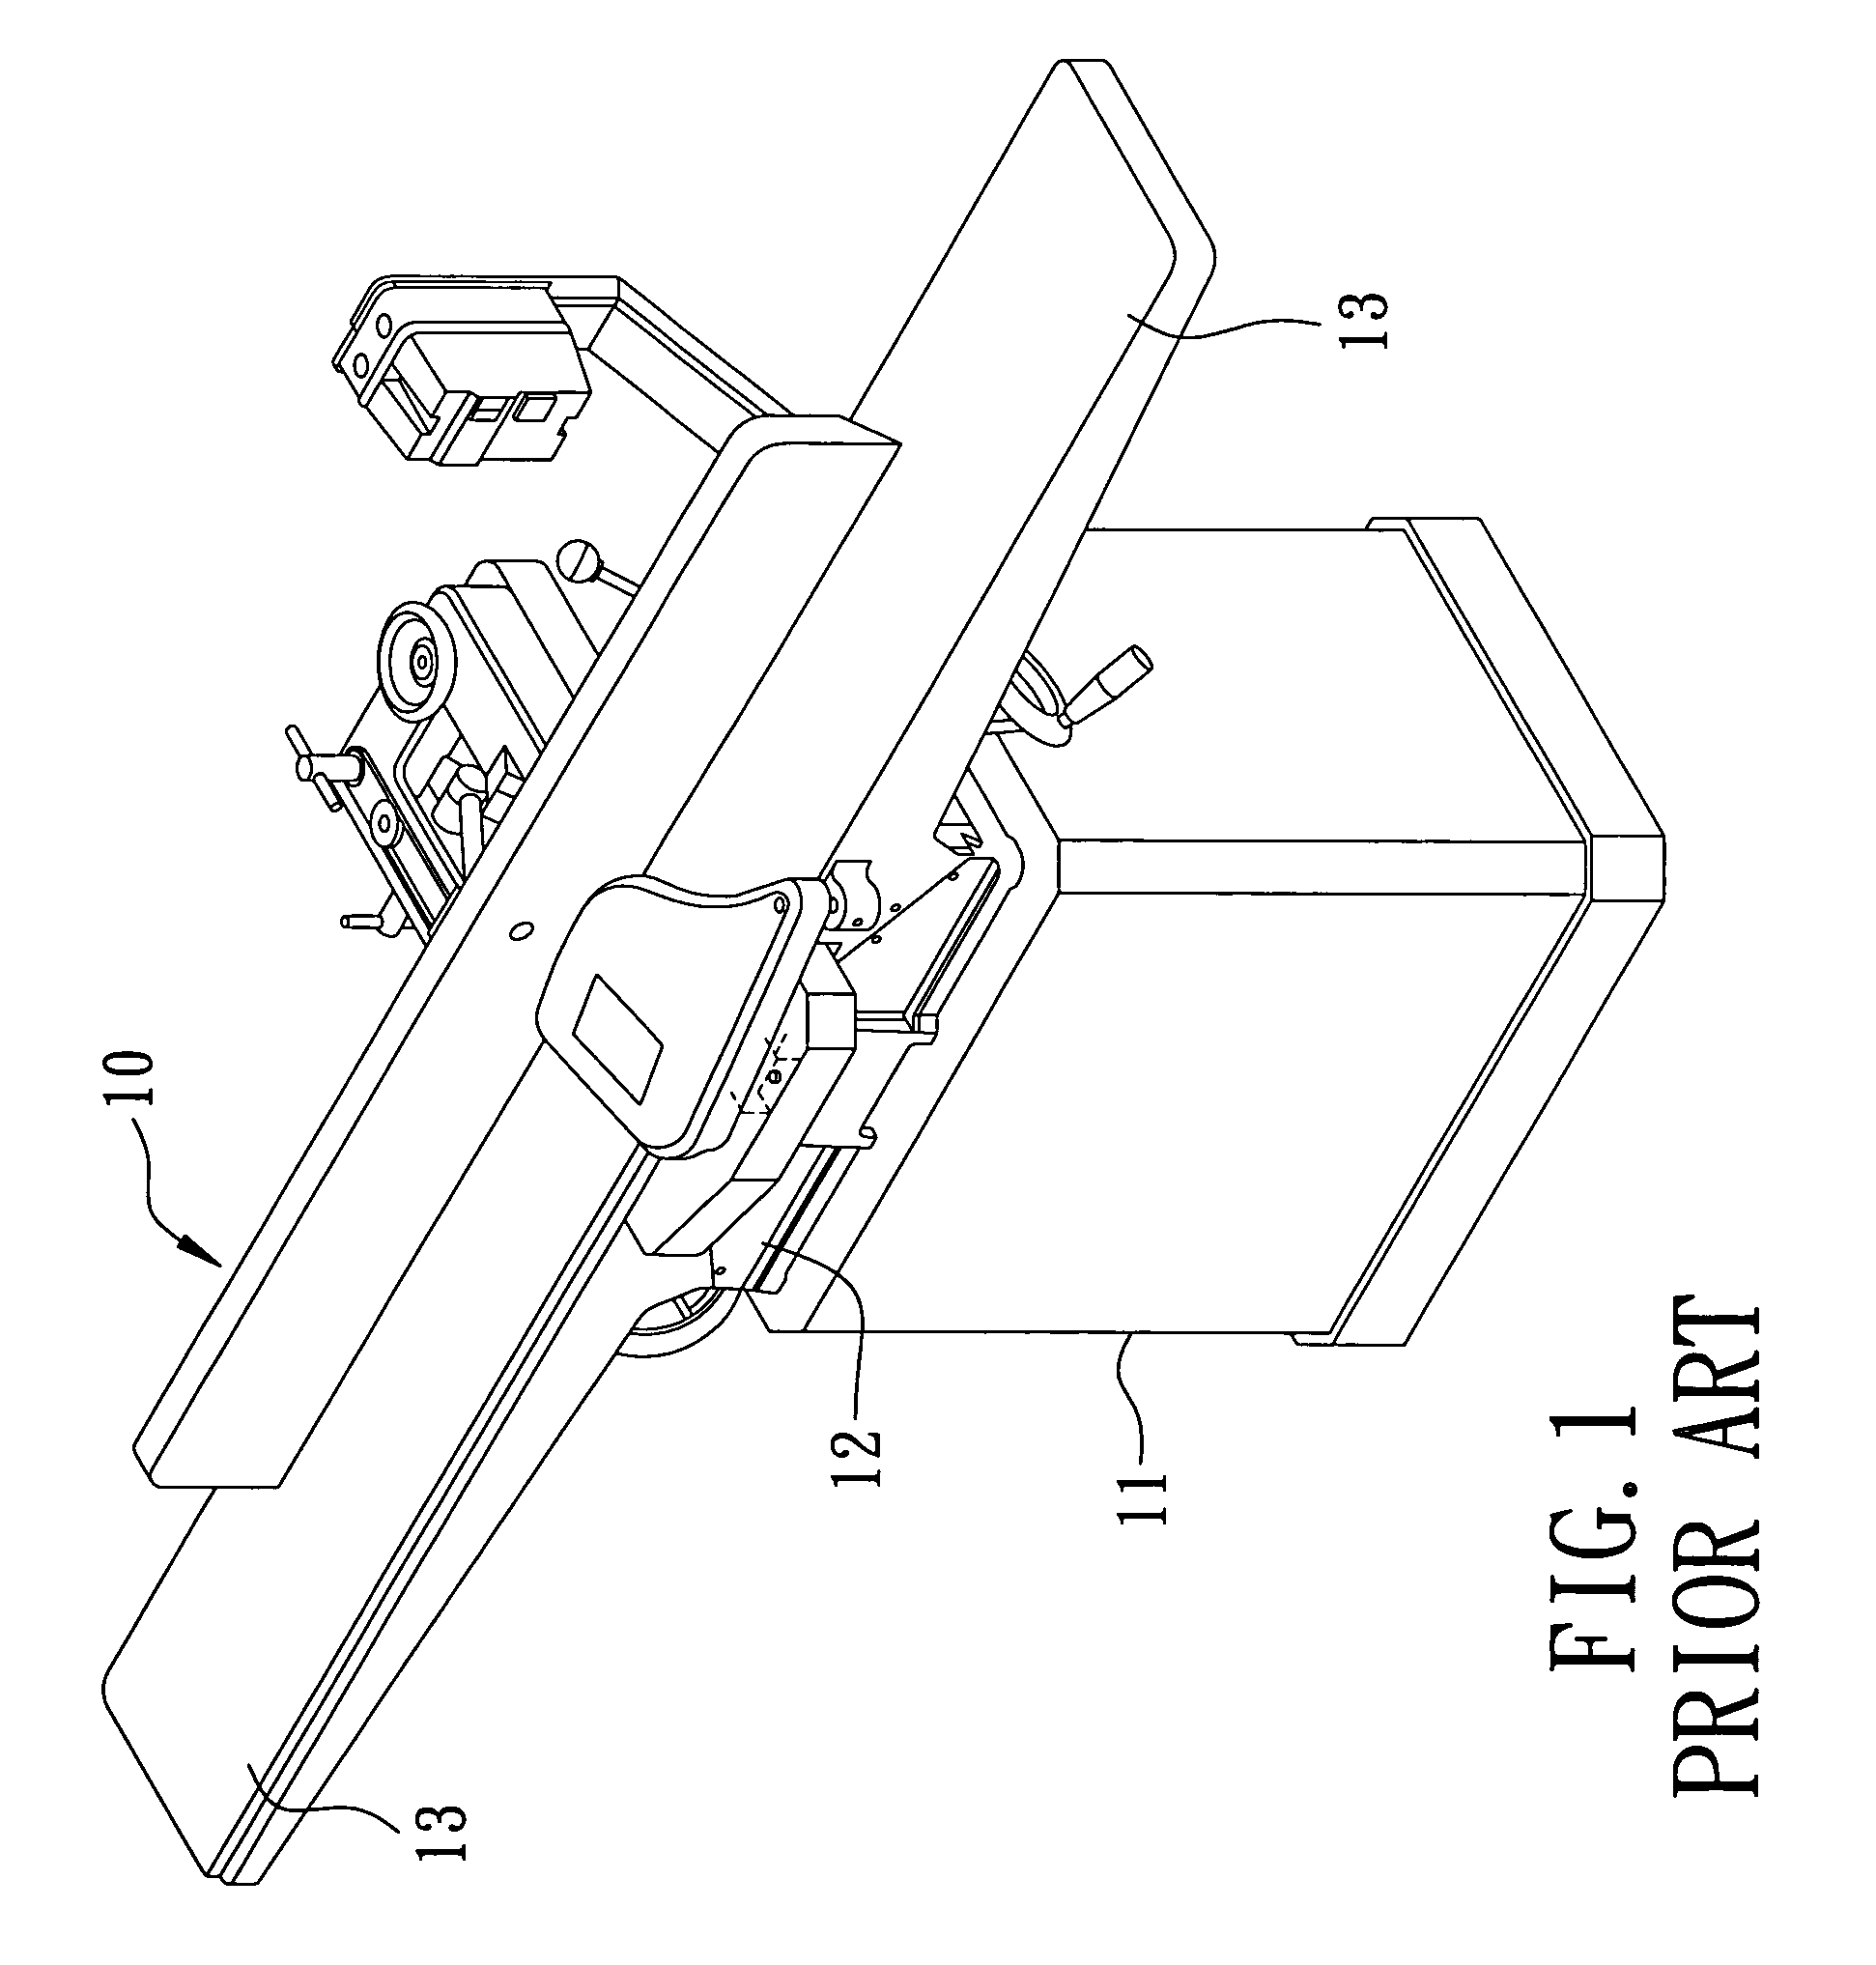 Level adjusting device for a cutter head of a jointer/planer machine